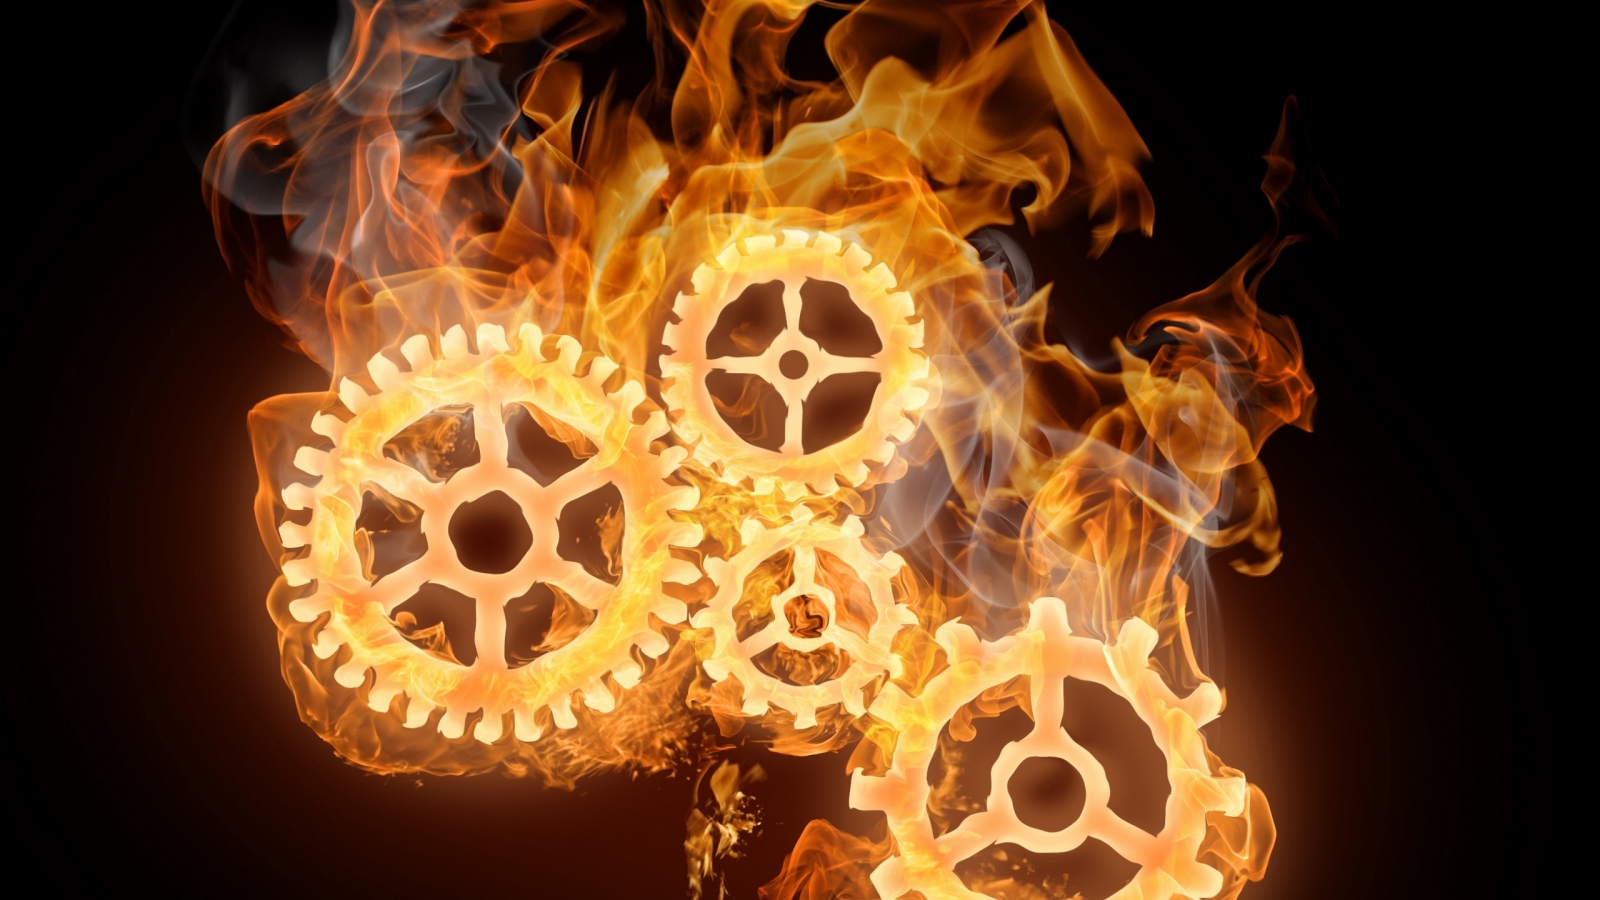 Wheels on Fire for 1600 x 900 HDTV resolution